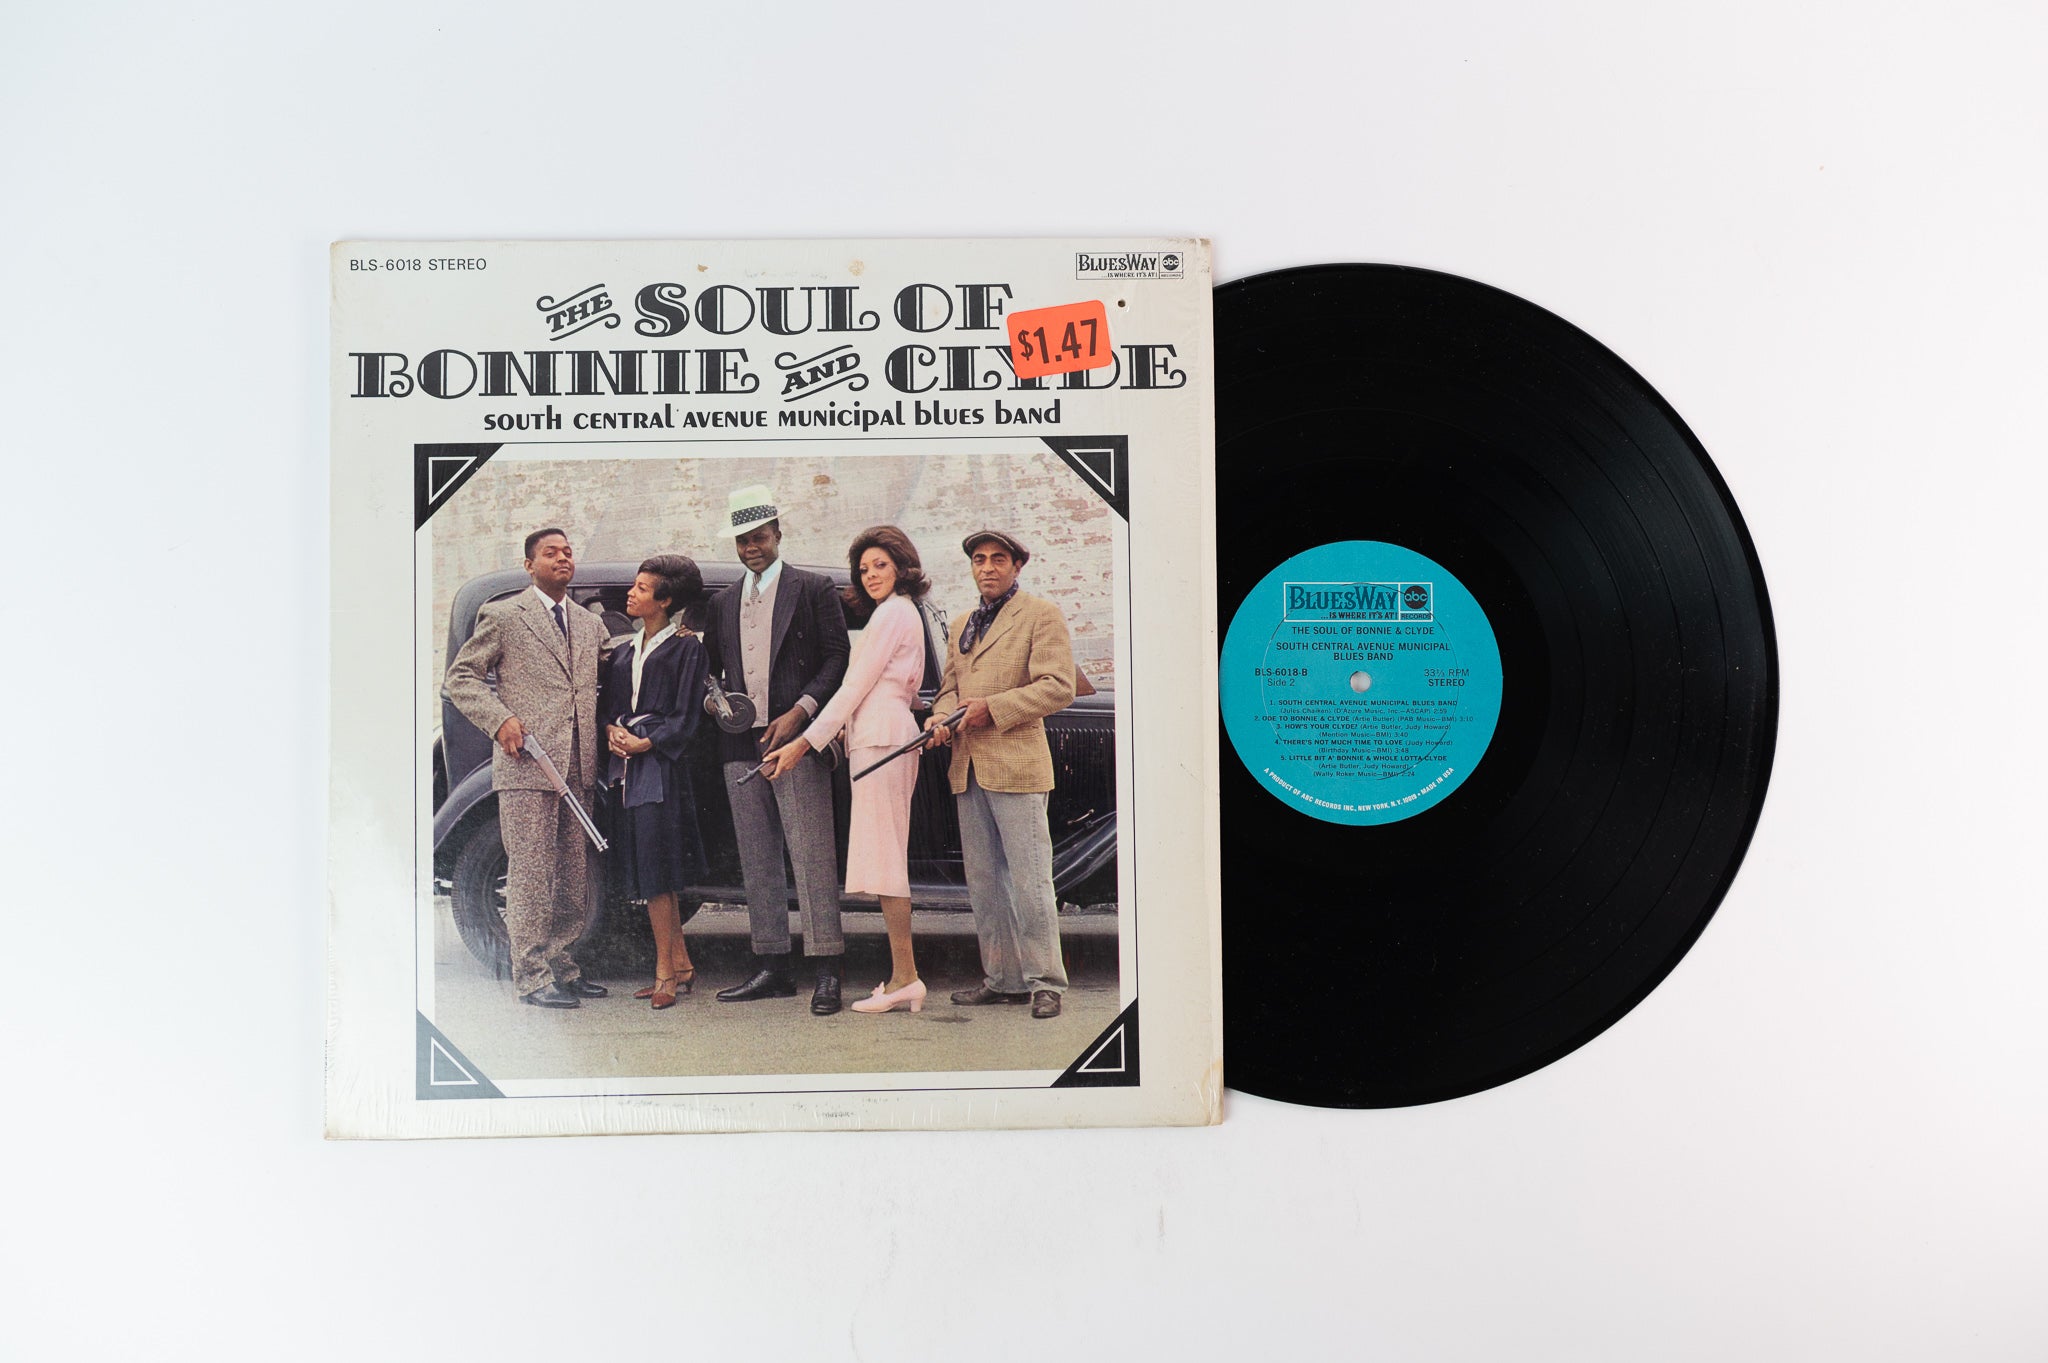 South Central Avenue Municipal Blues Band - The Soul Of Bonnie And Clyde on Bluesway